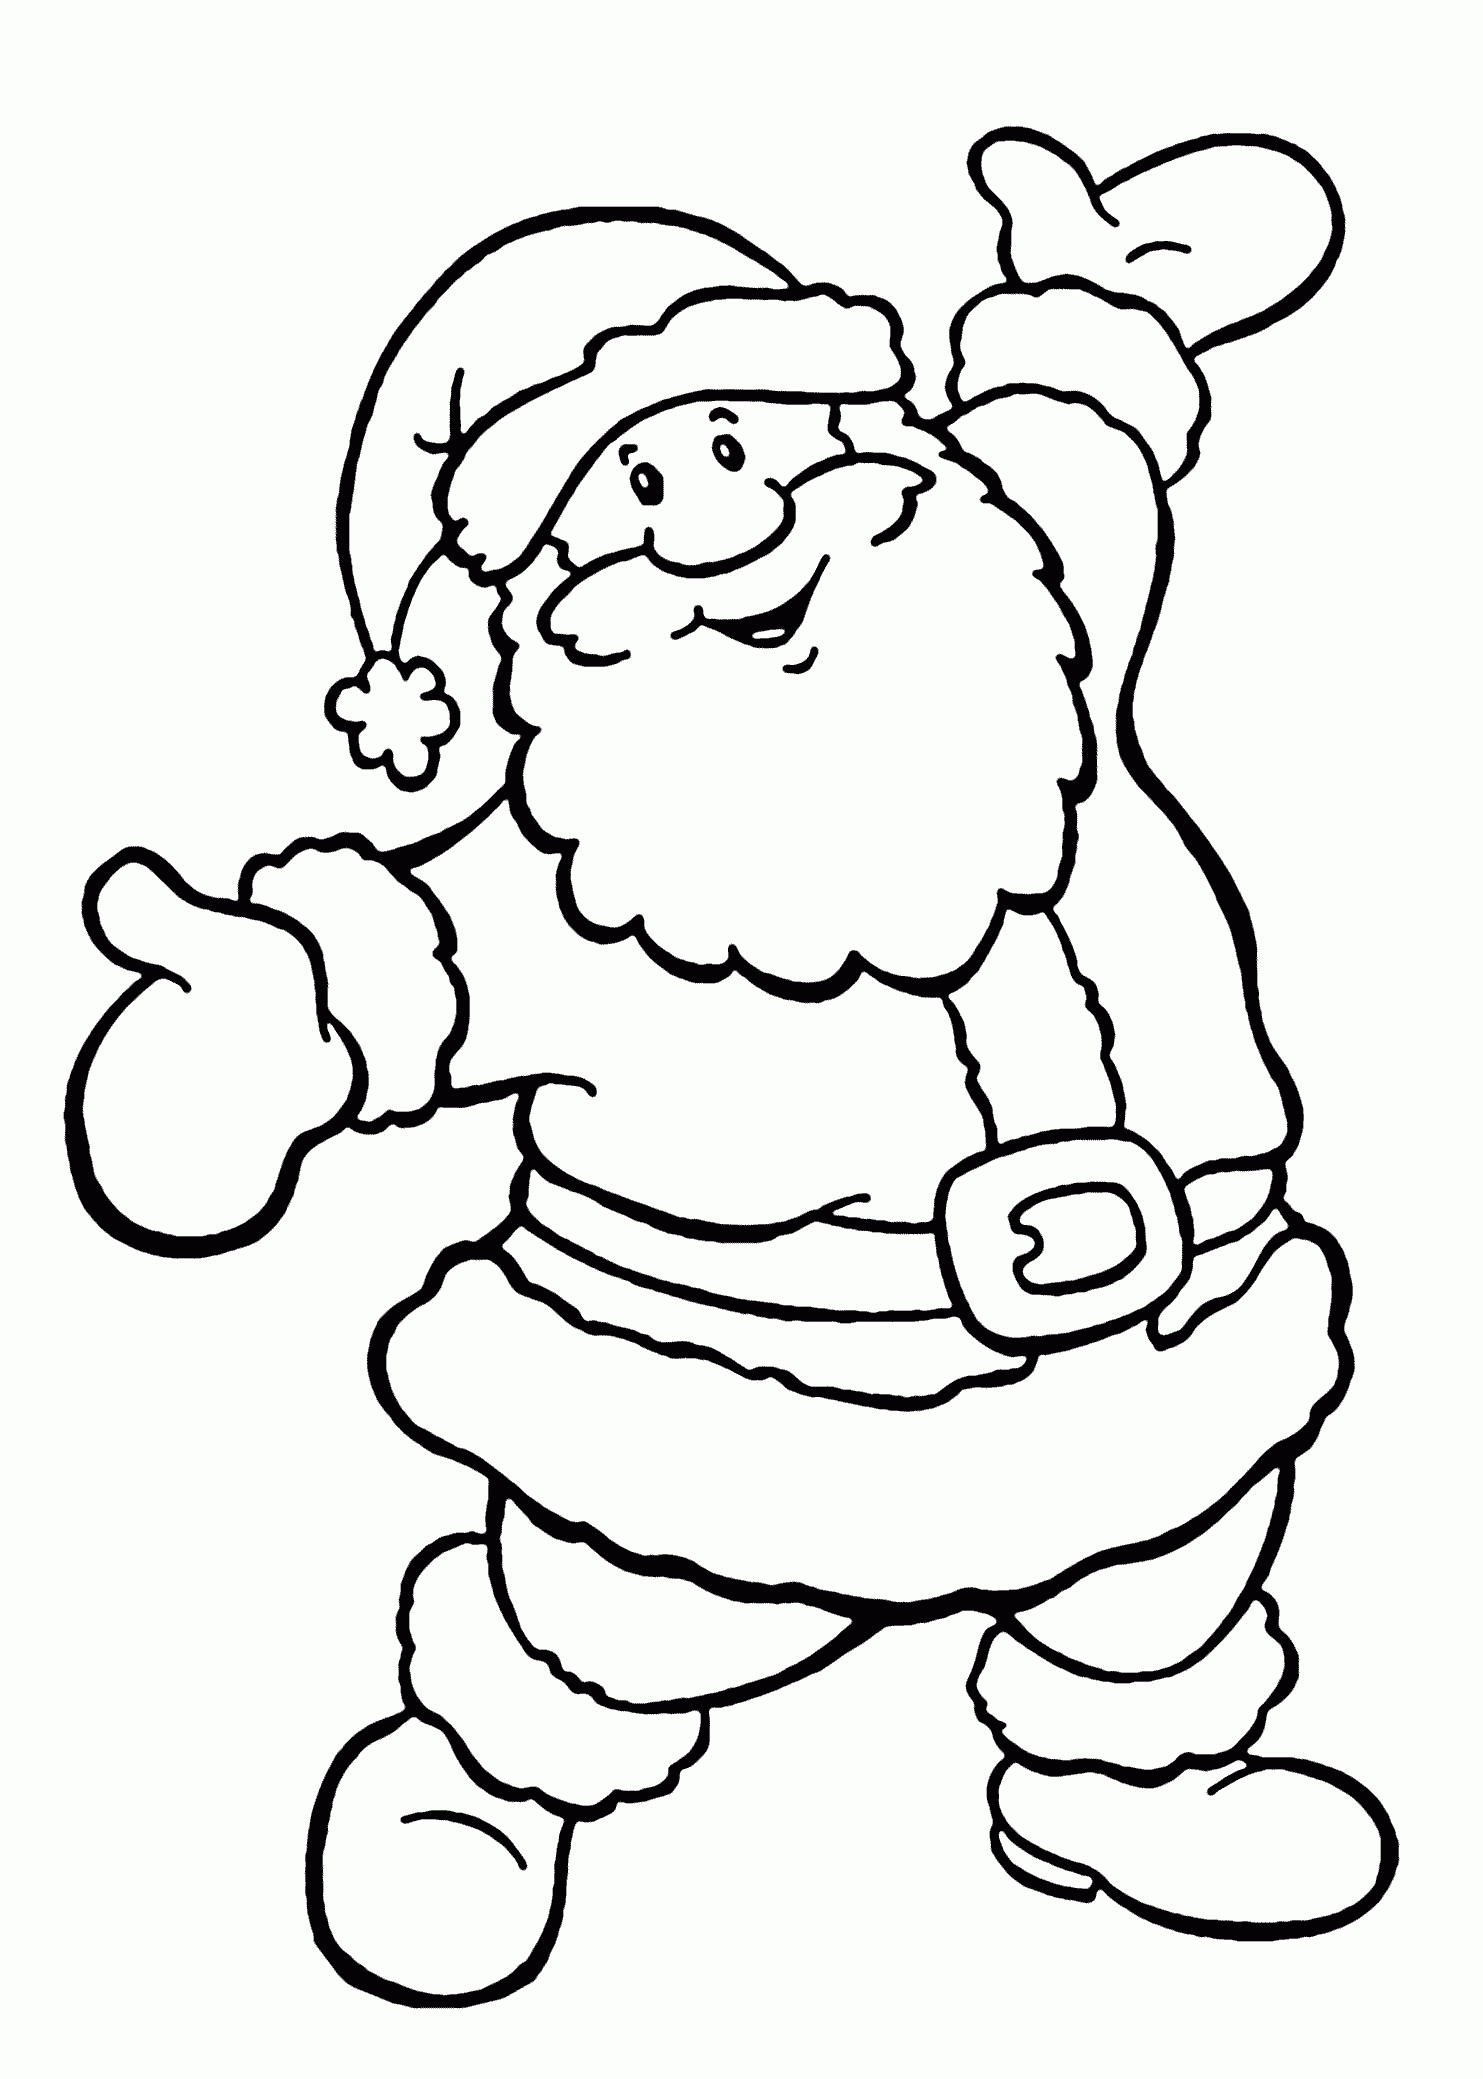 Happy Santa Coloring Pages For Kids, Printable Free | Christmas - Santa Coloring Pages Printable Free